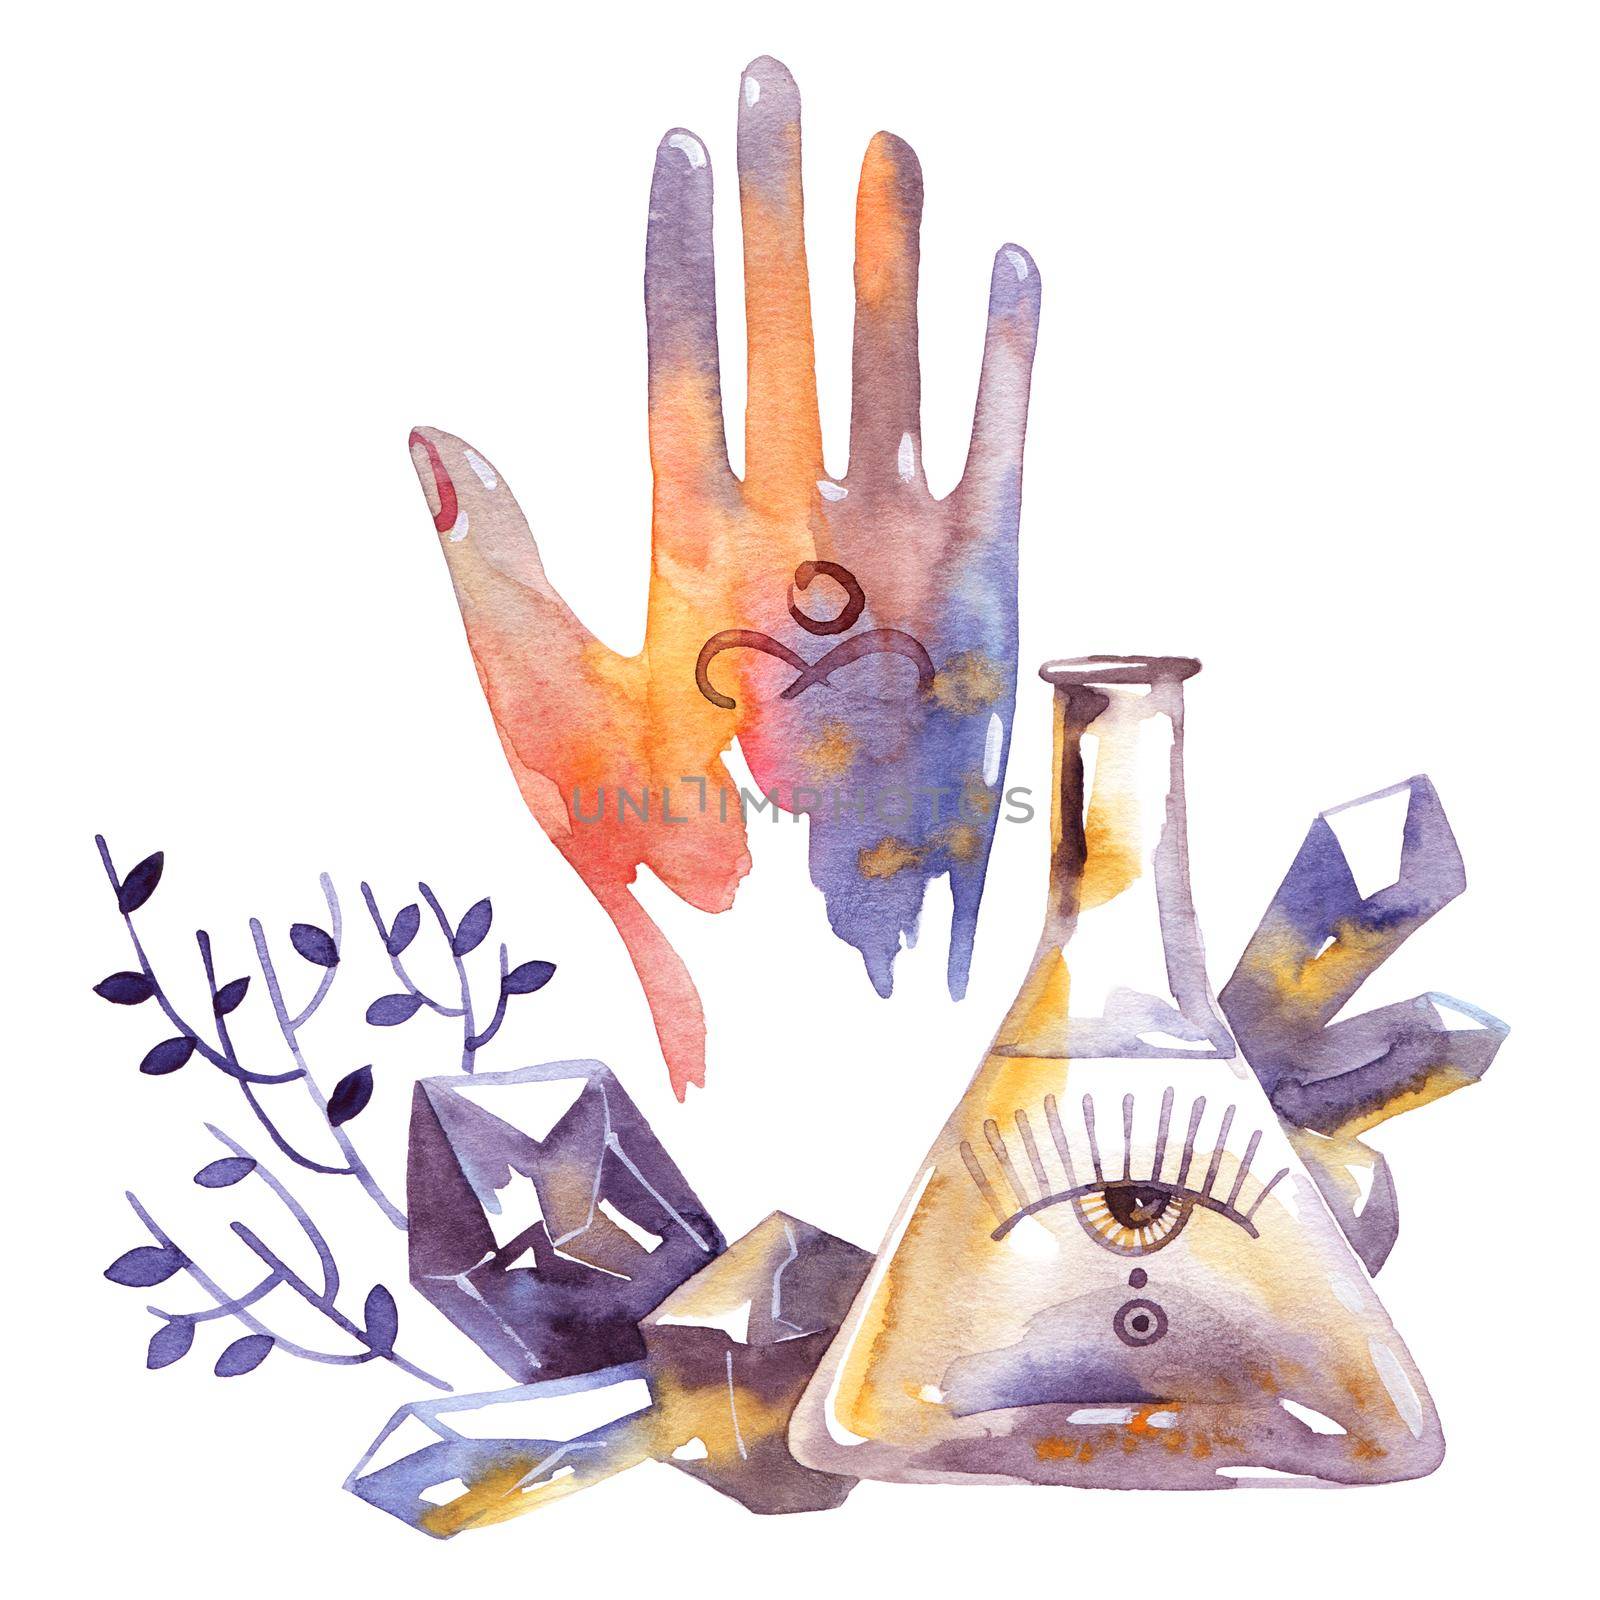 Watercolor illustration in vintage style of alchemy objects - vial, all-seeing eye, crystals, hand, leaves